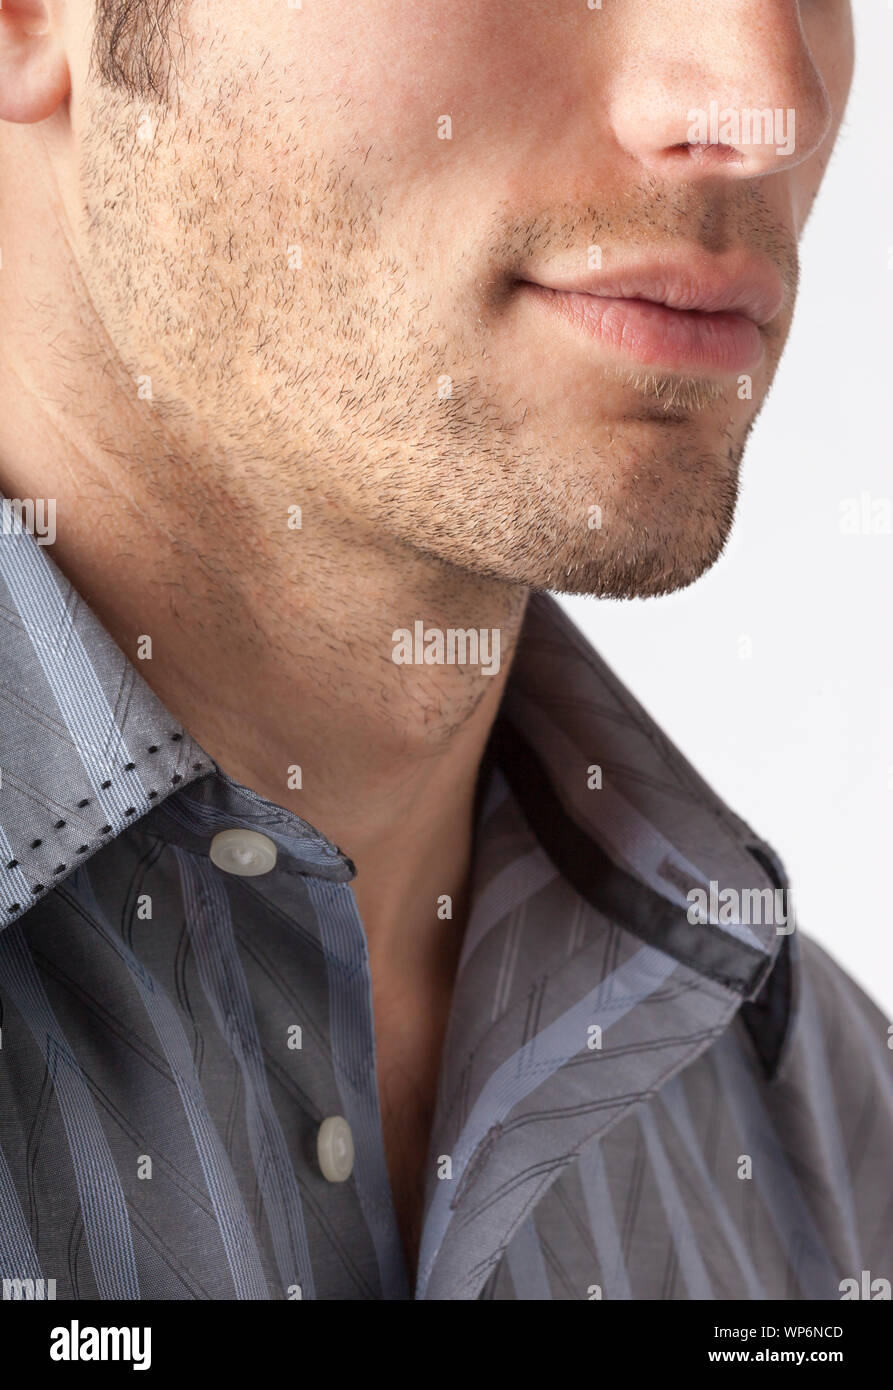 Close-up of man's chin and jawline with facial hair beard stubble five o'clock shadow. Men's personal care and grooming. Stock Photo